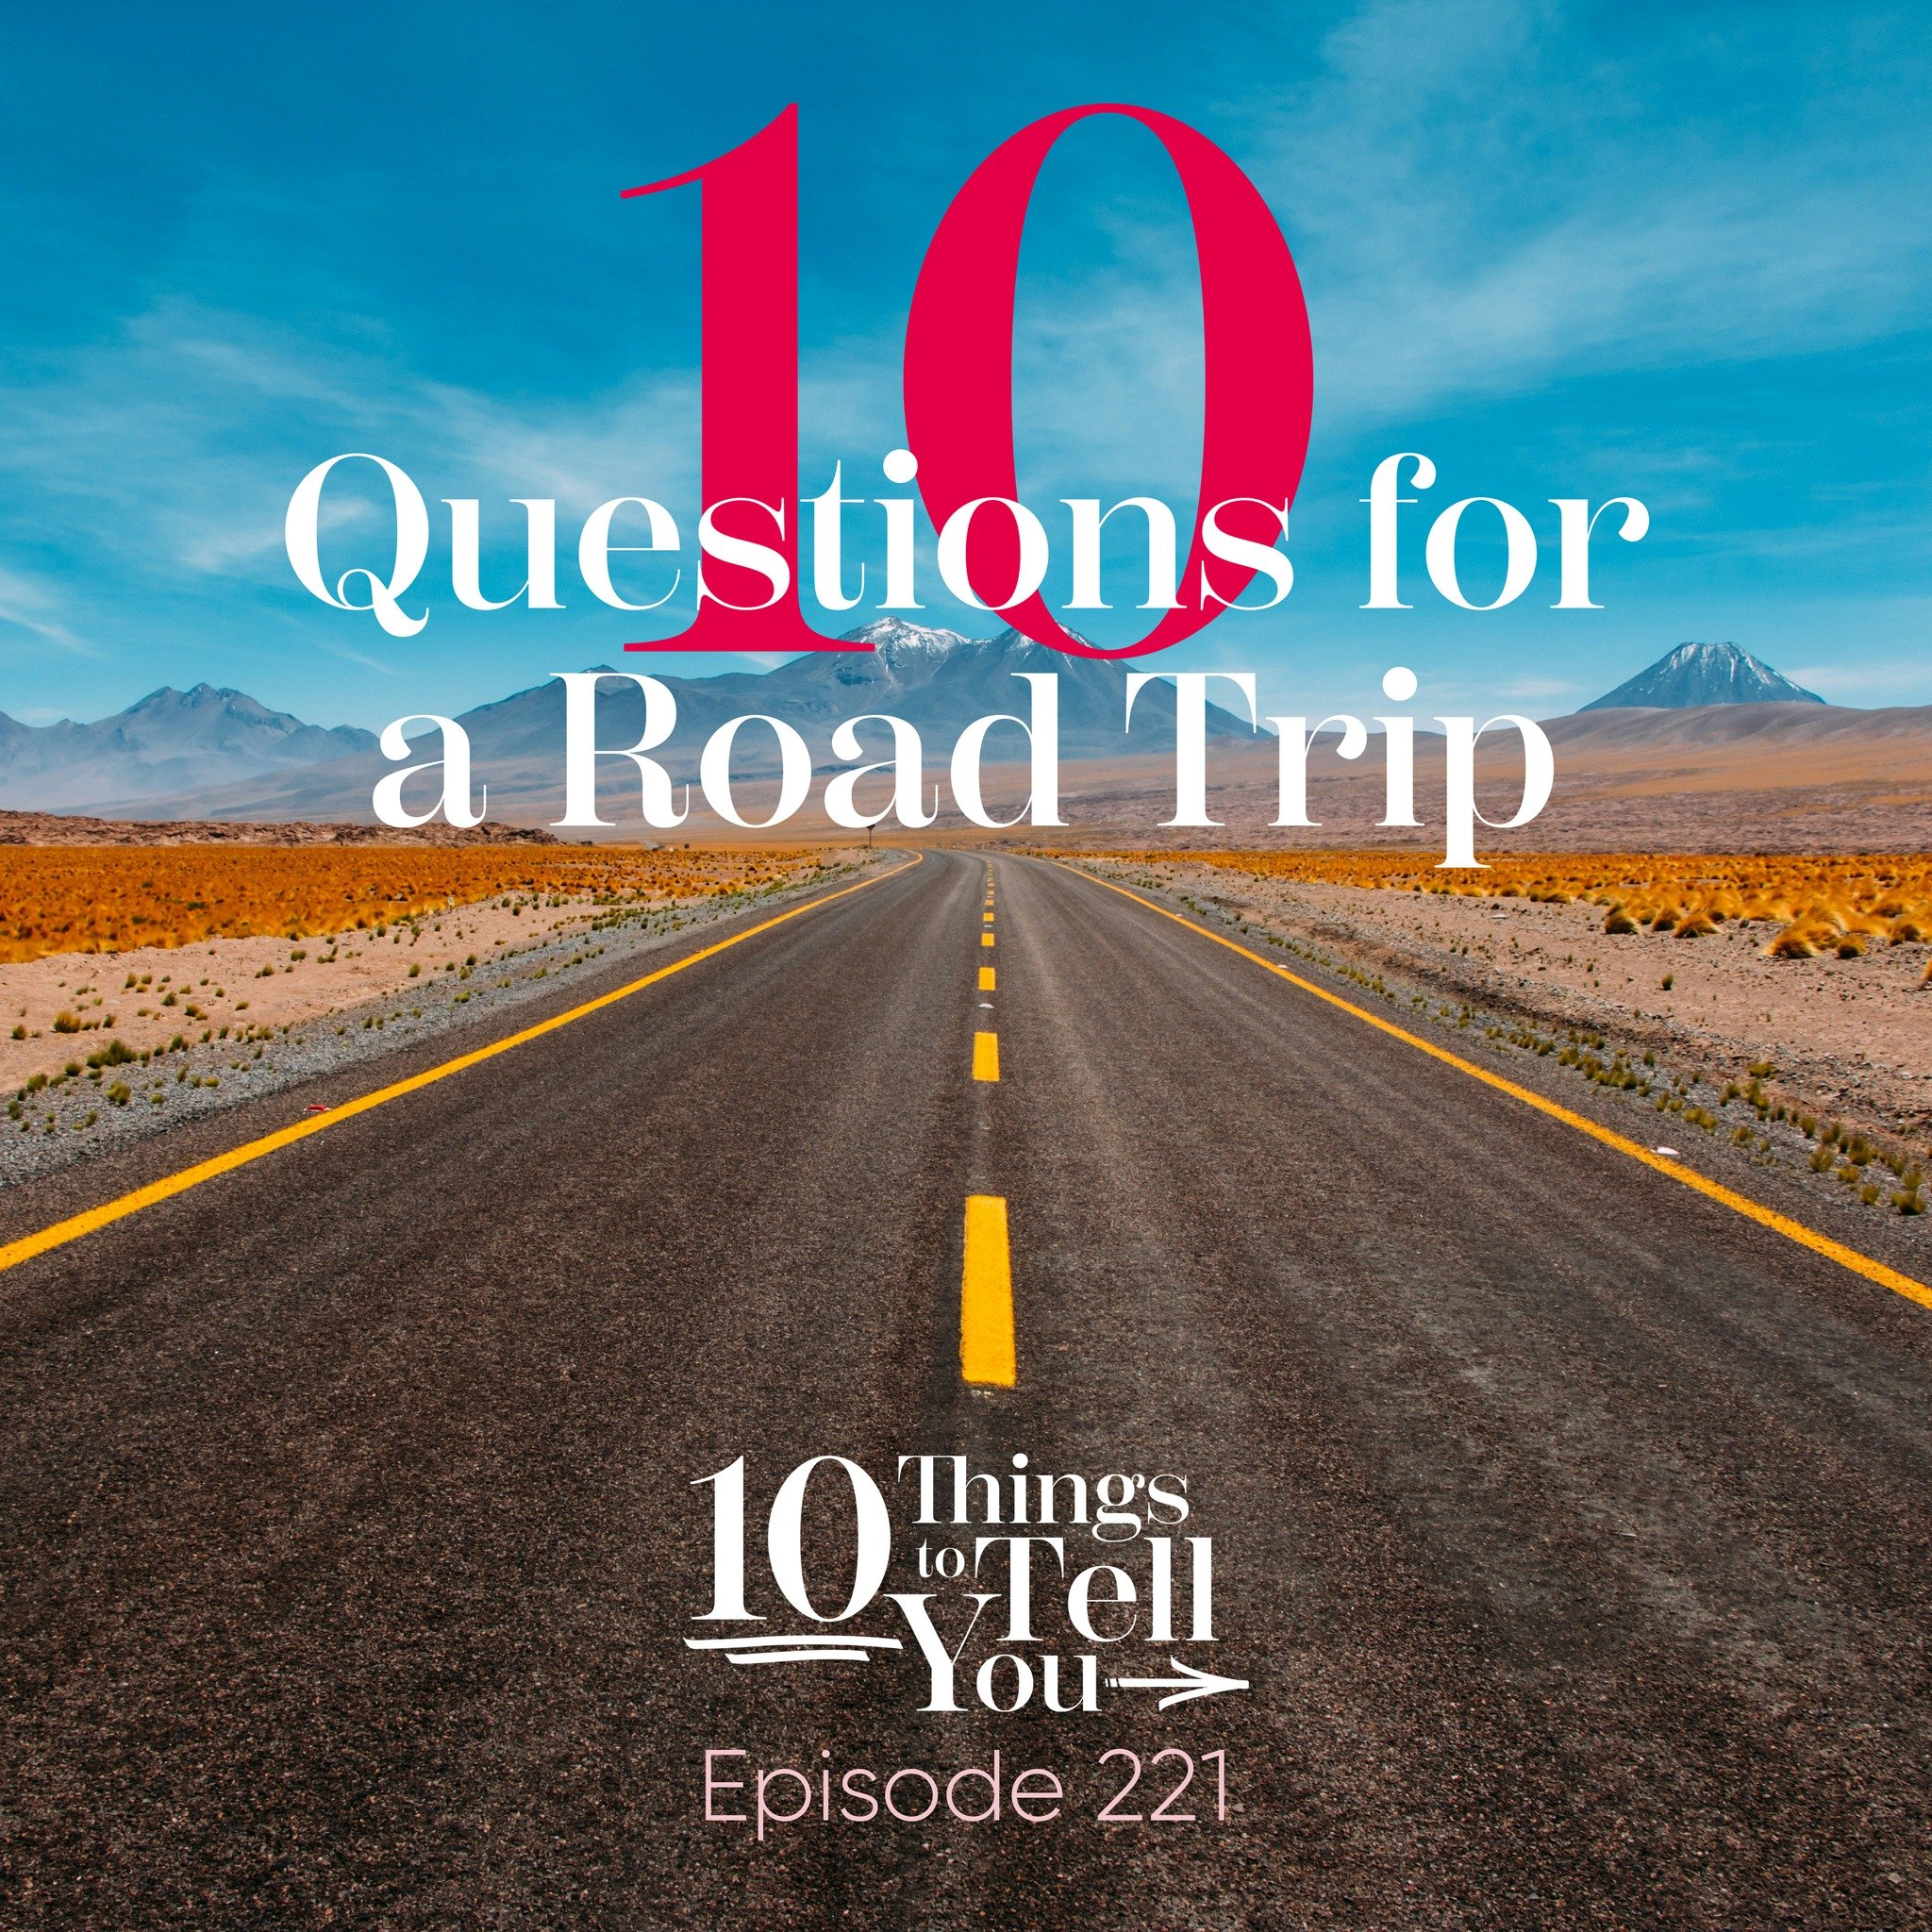 It's almost road trip season! 

I'm giving you 10 prompts for great conversations in the car. I purposefully designed these to work with any age, and any type of relationship.

They're a mix of fun and deep, and in the episode I share alternatives or